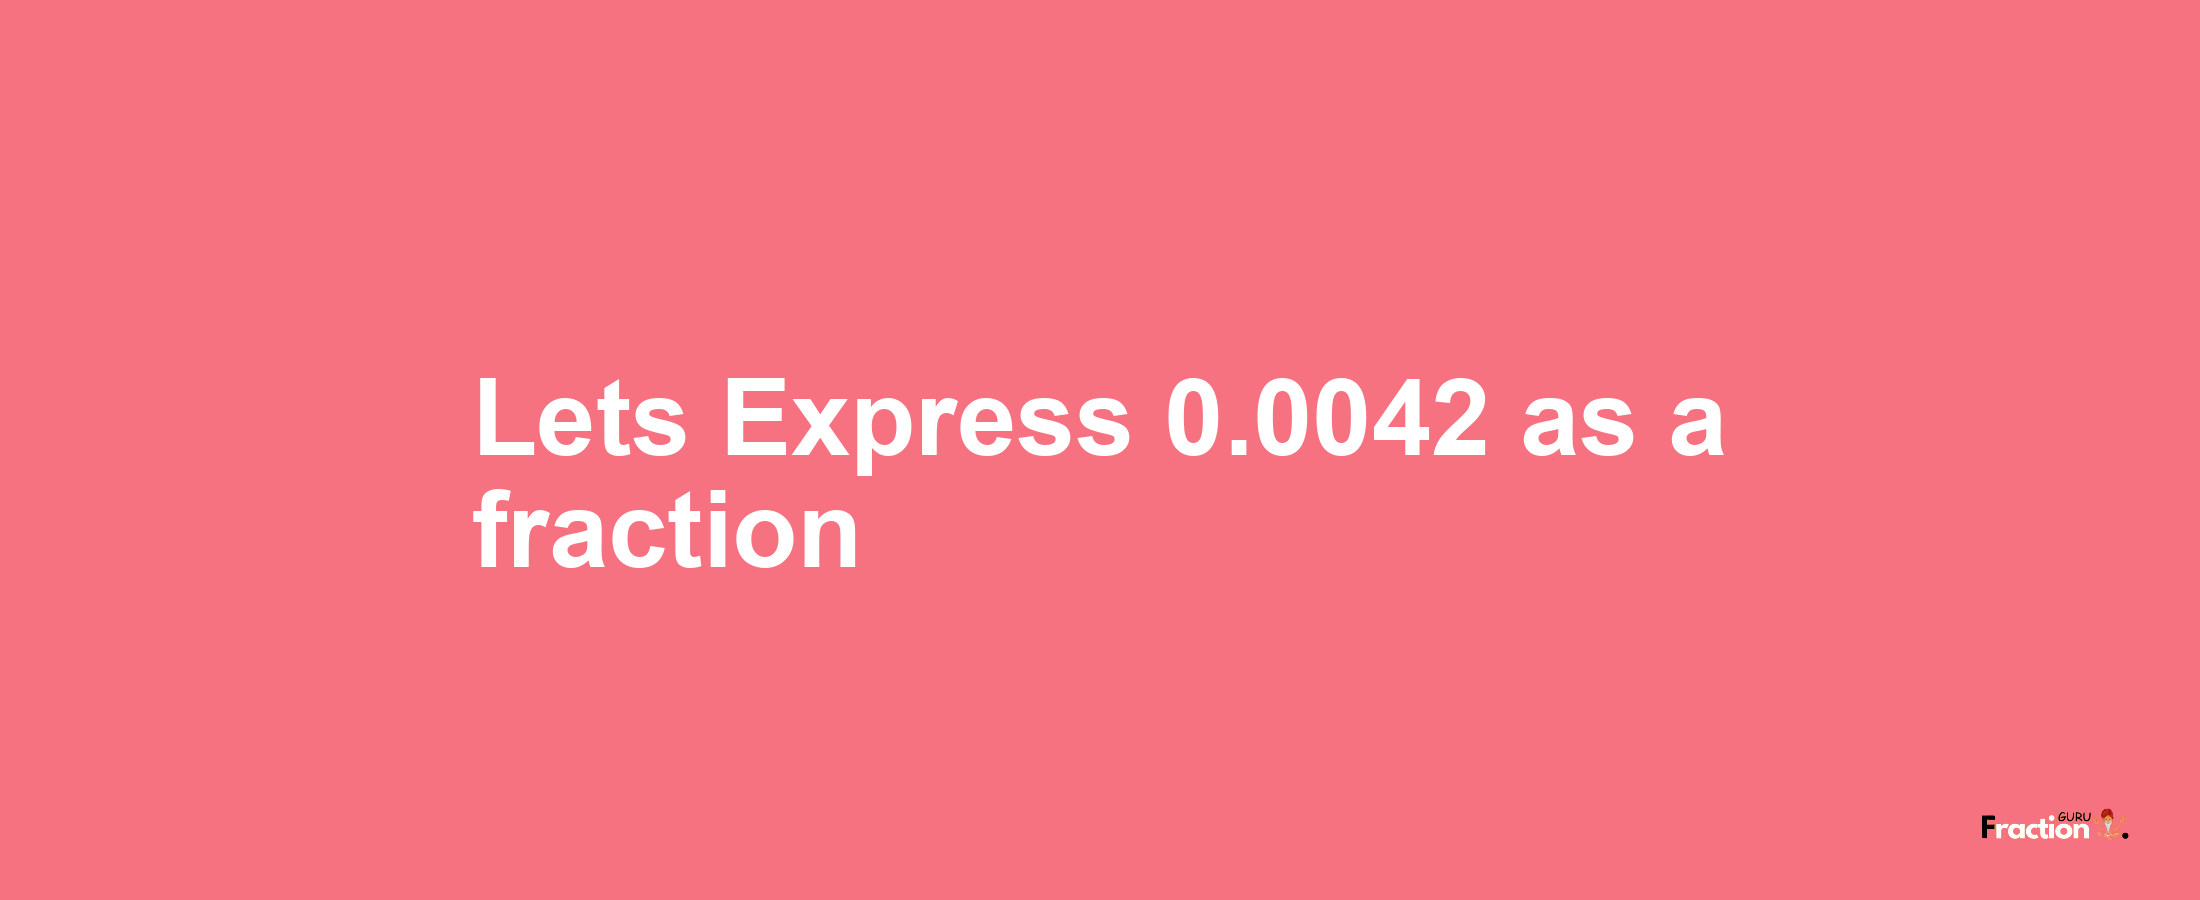 Lets Express 0.0042 as afraction